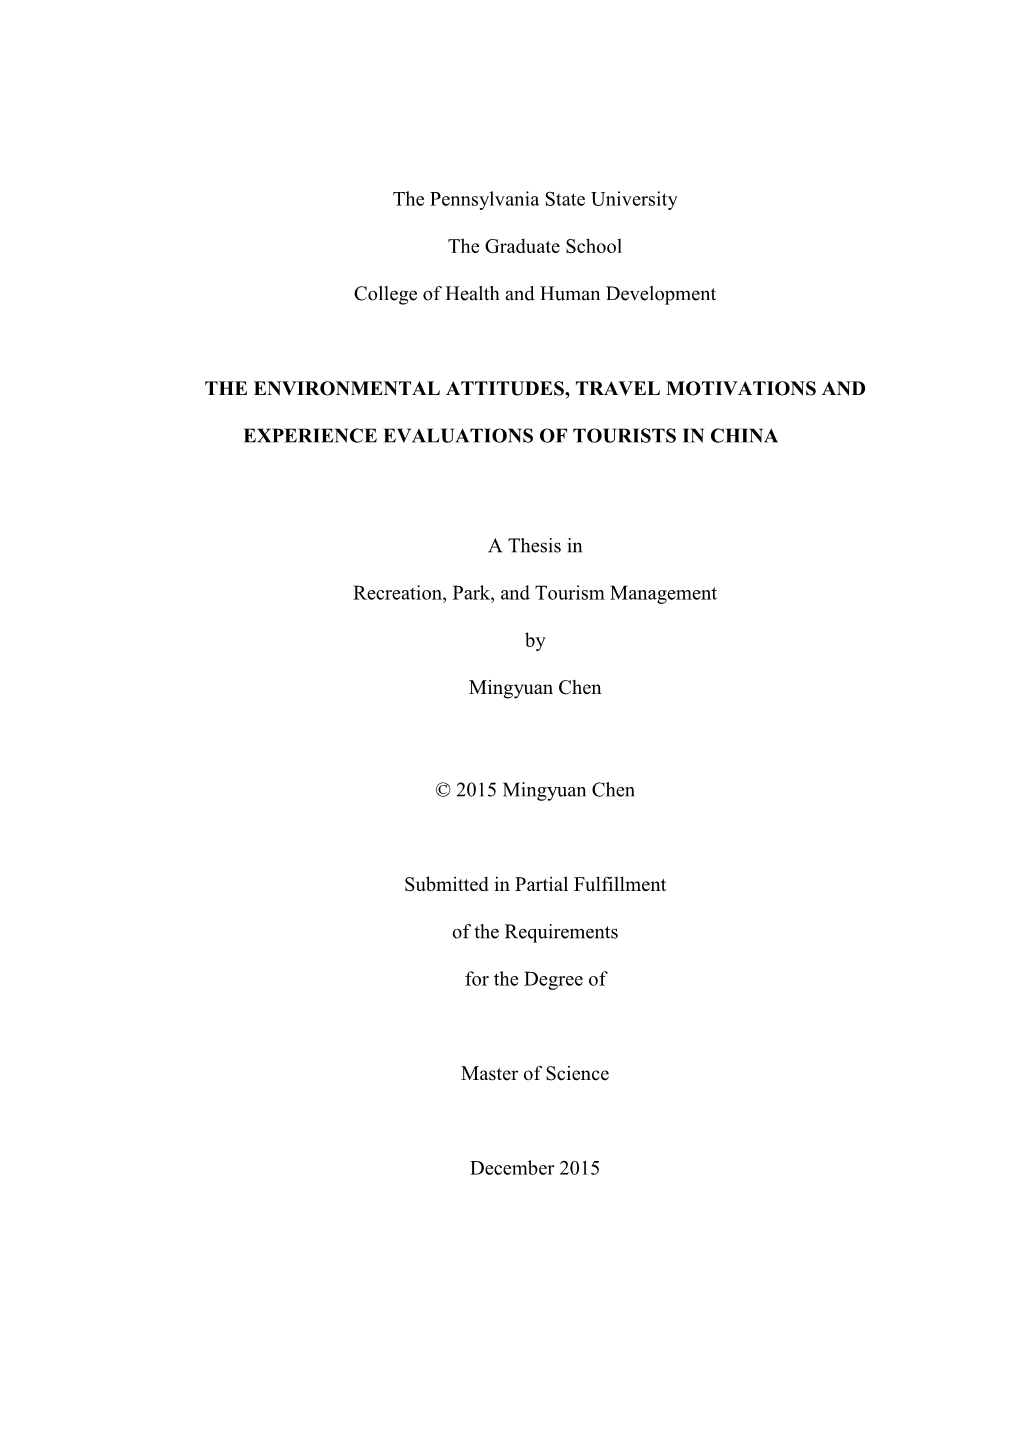 Open 1-Mingyuan Chen Master-Thesis Final Submission.Pdf